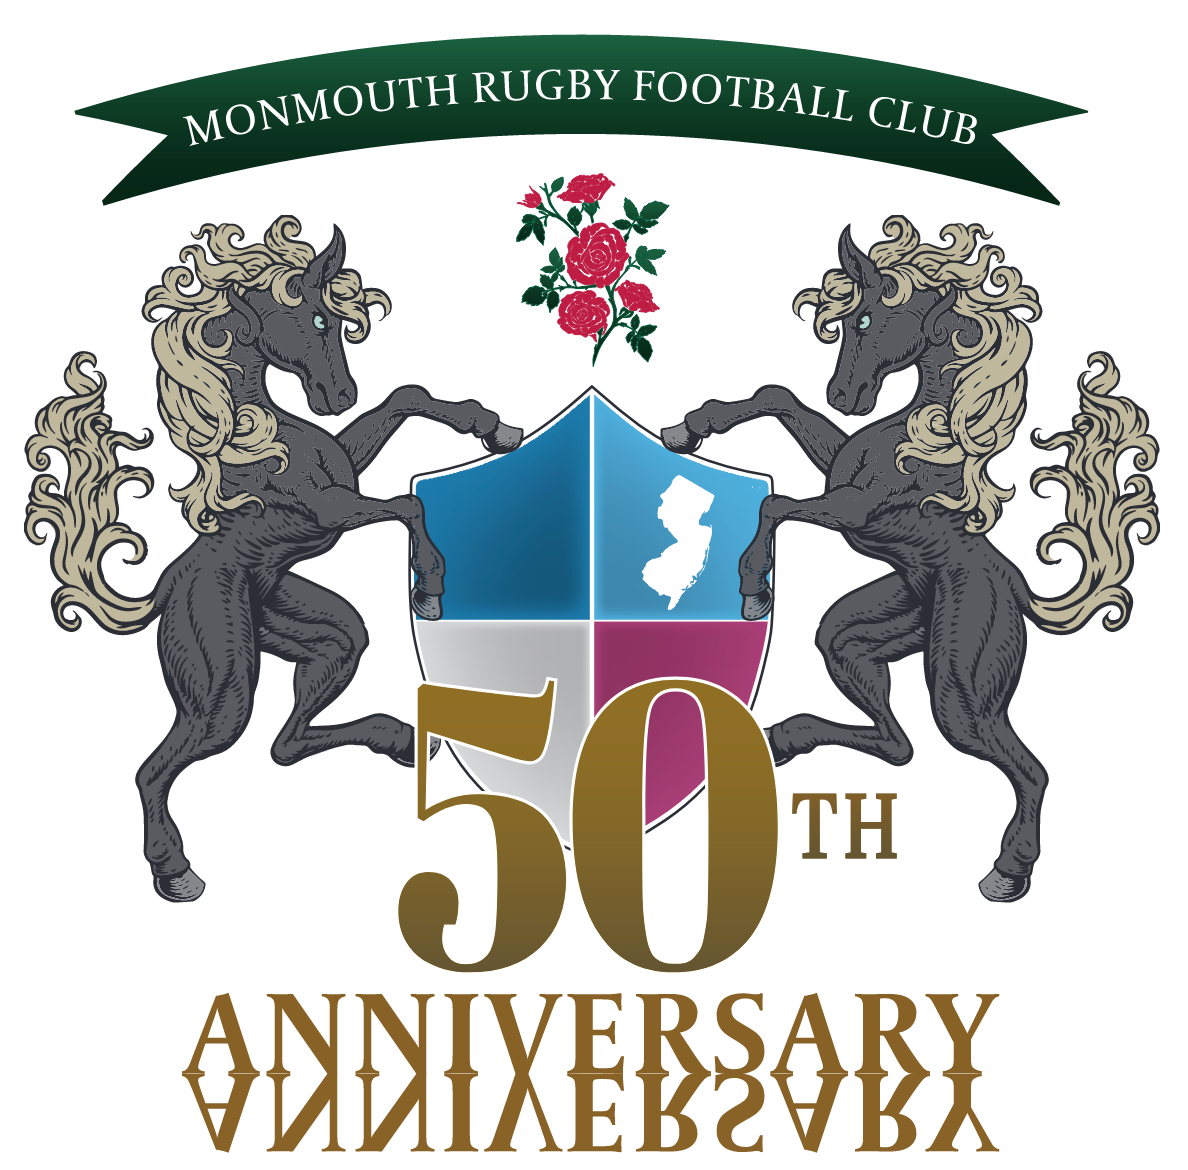 Monmouth Rugby Football Club